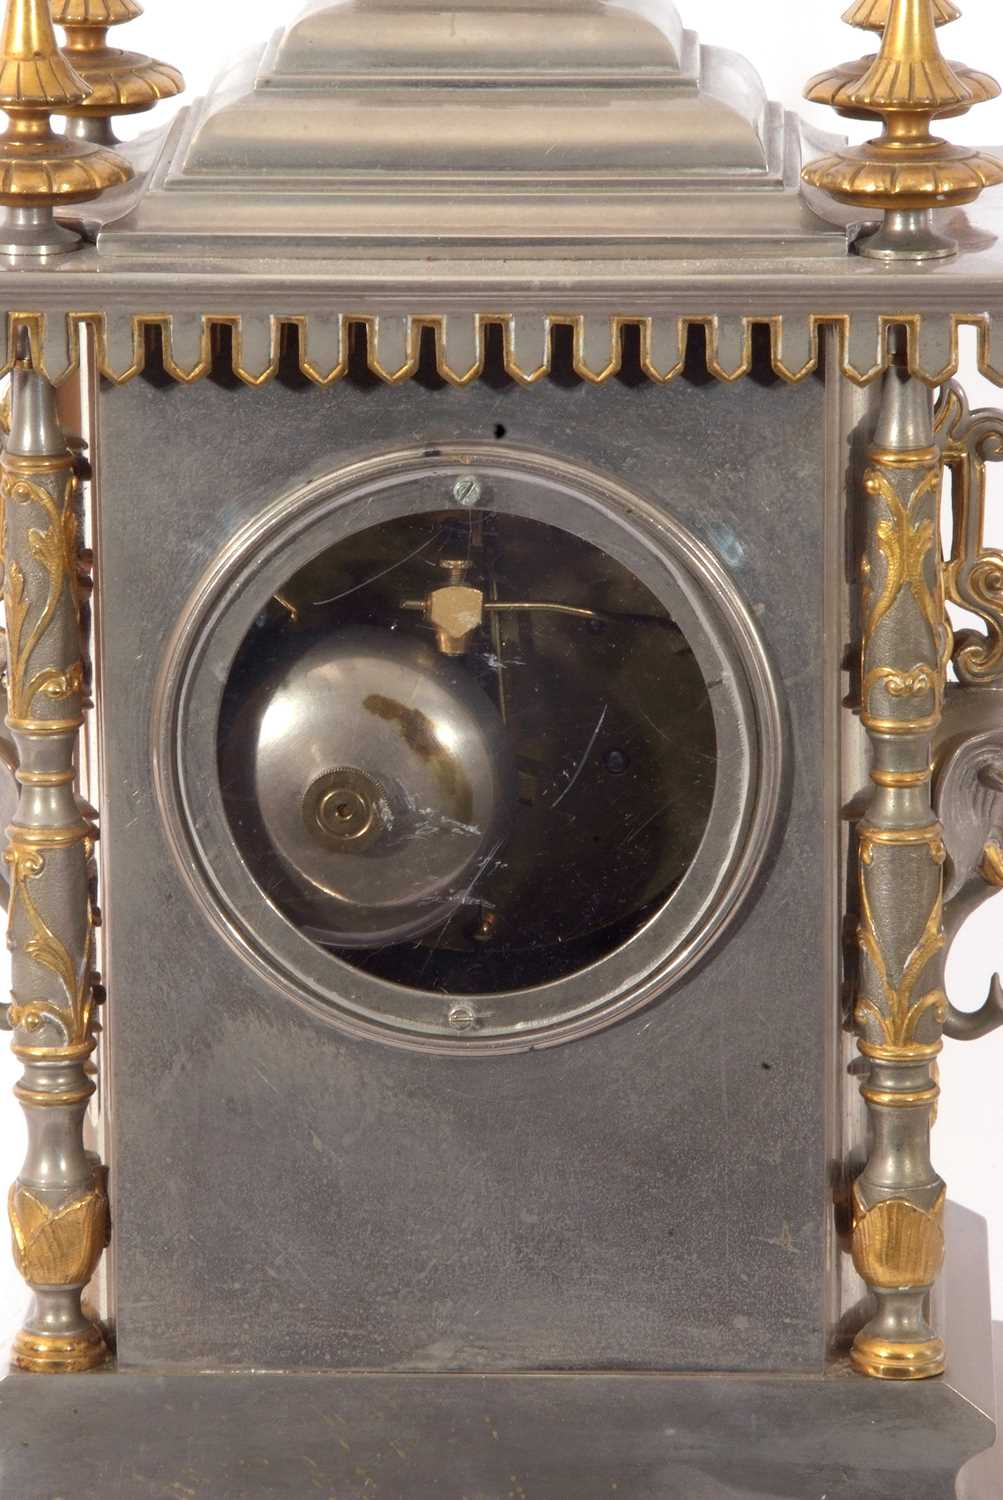 Good quality late 19th/early 20th century mantel clock, set in architectural metal and gilt - Image 8 of 11